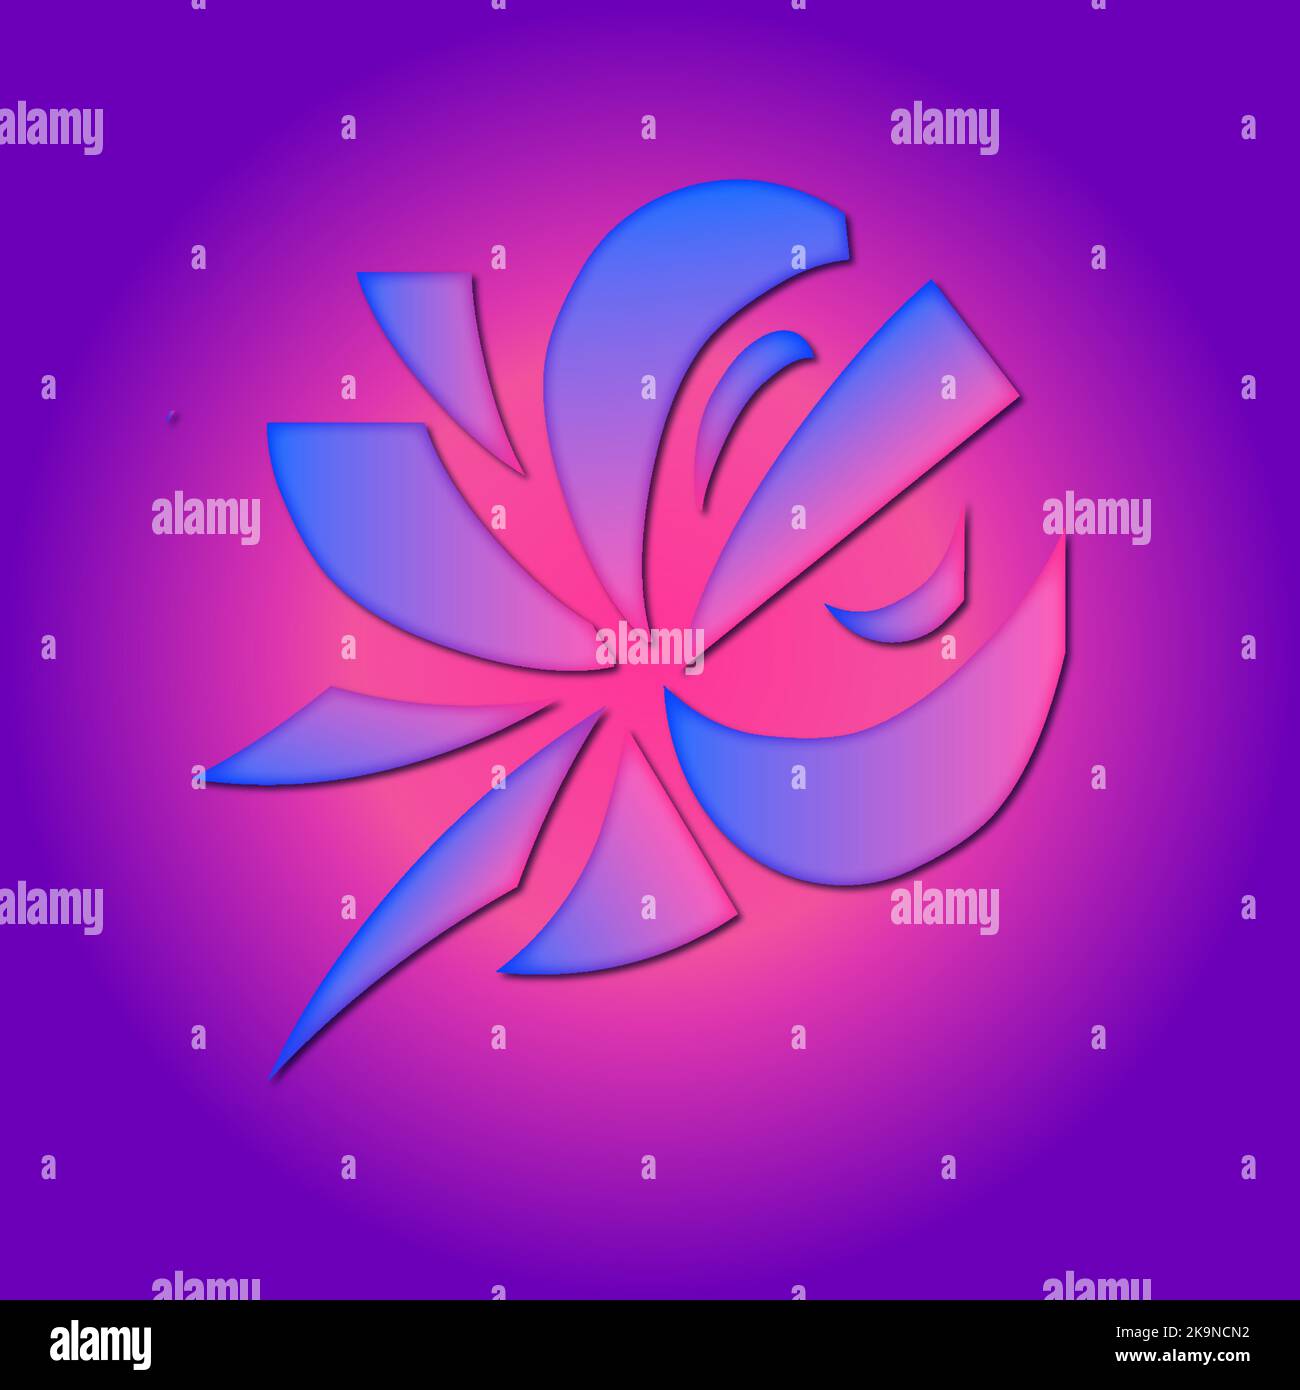 Abstract template pattern. Bright neon colors. Geometric shapes on purple luminous background. Element for design. Stock Vector